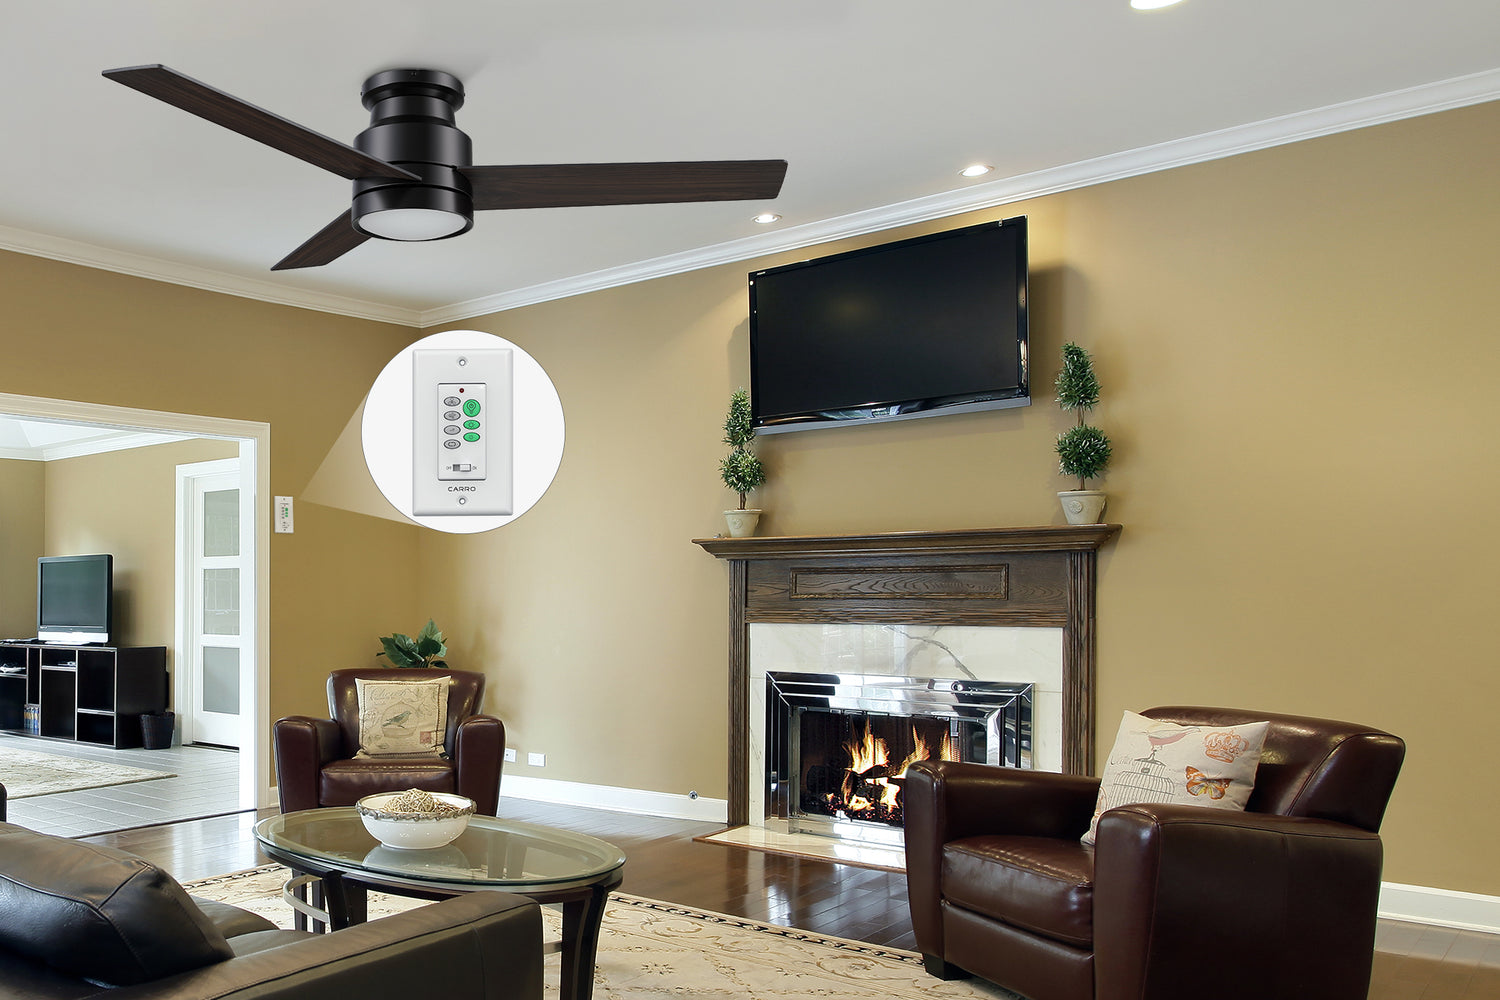 52inch low profile ceiling fan with LED light well matches to the black sofa in modern living room.